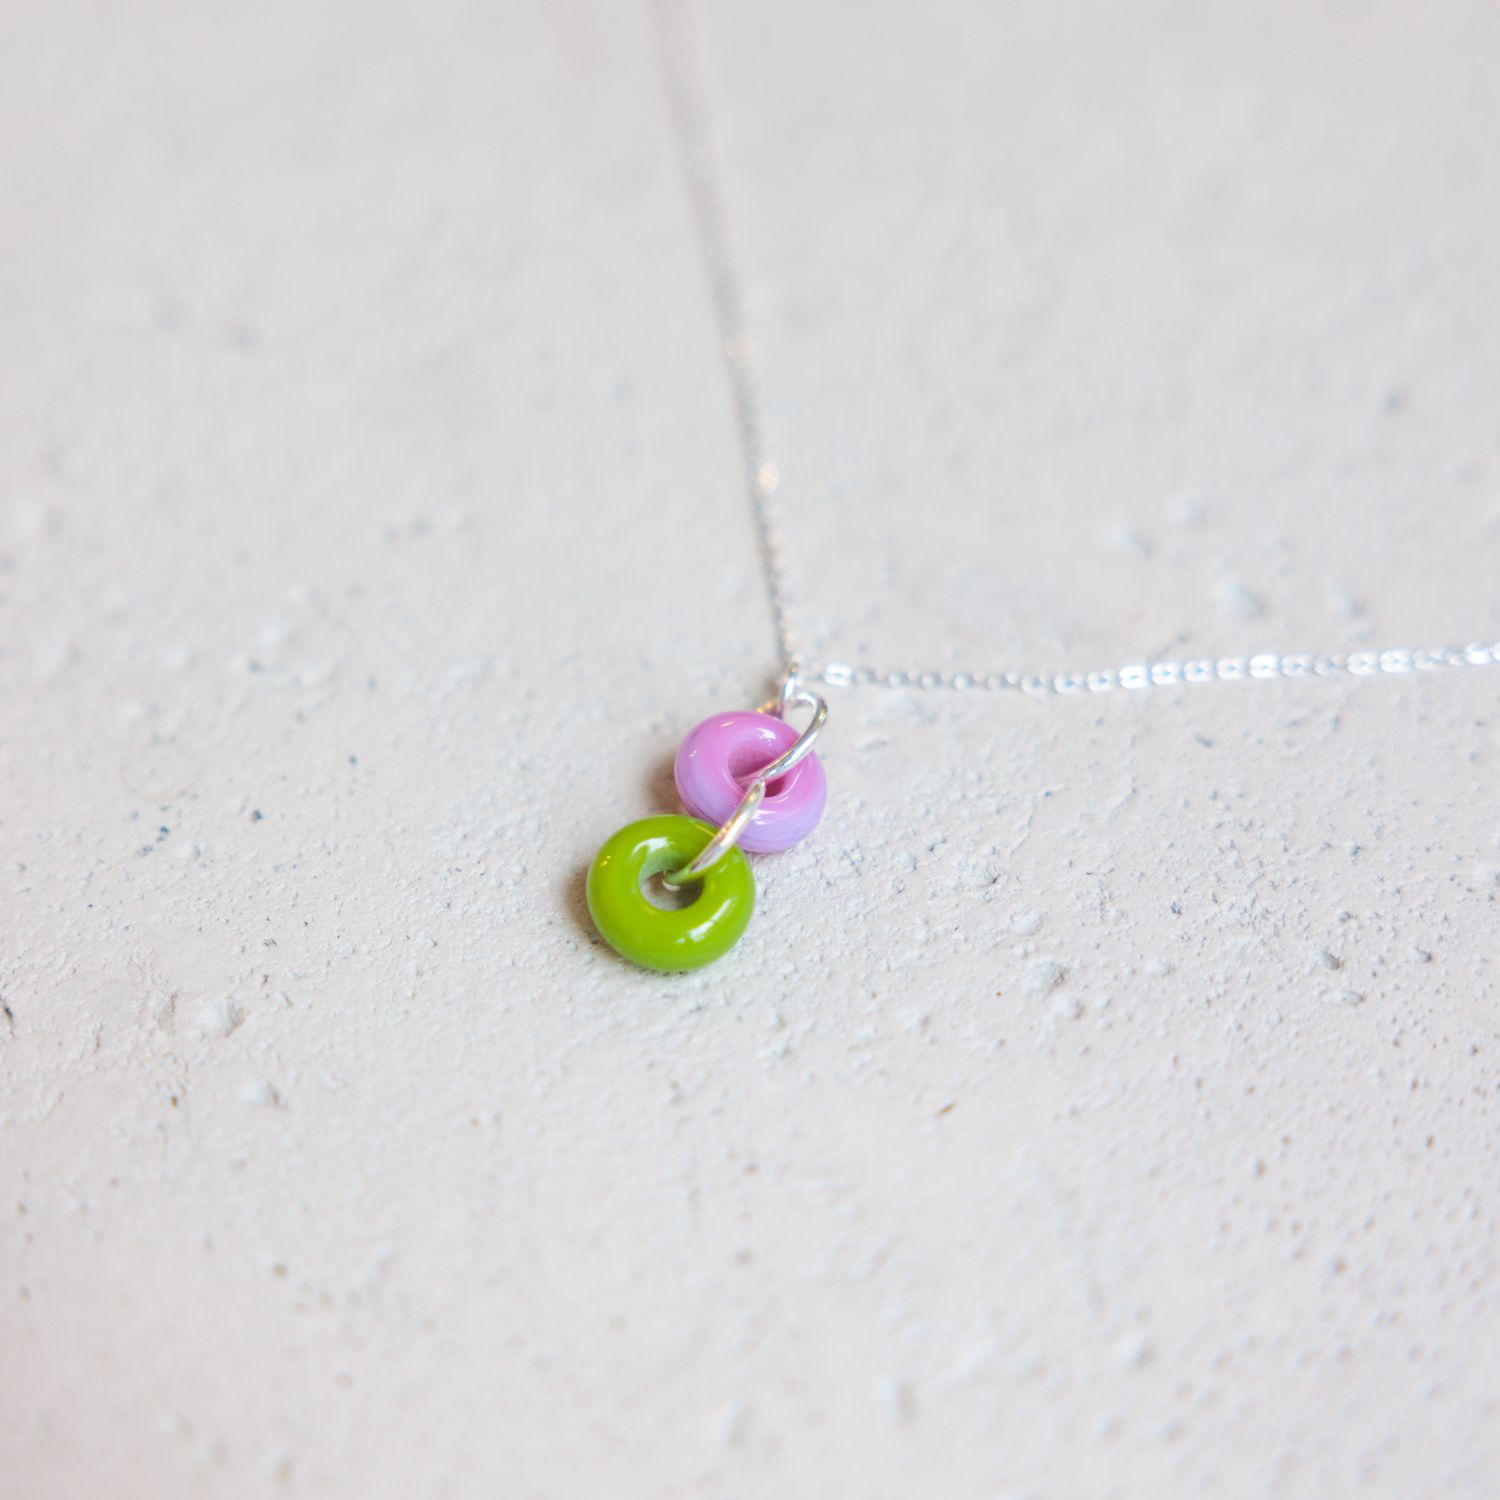 Jill Cribbin: Cheerie-oh Necklace in Pink and Green Product Image 2 of 2